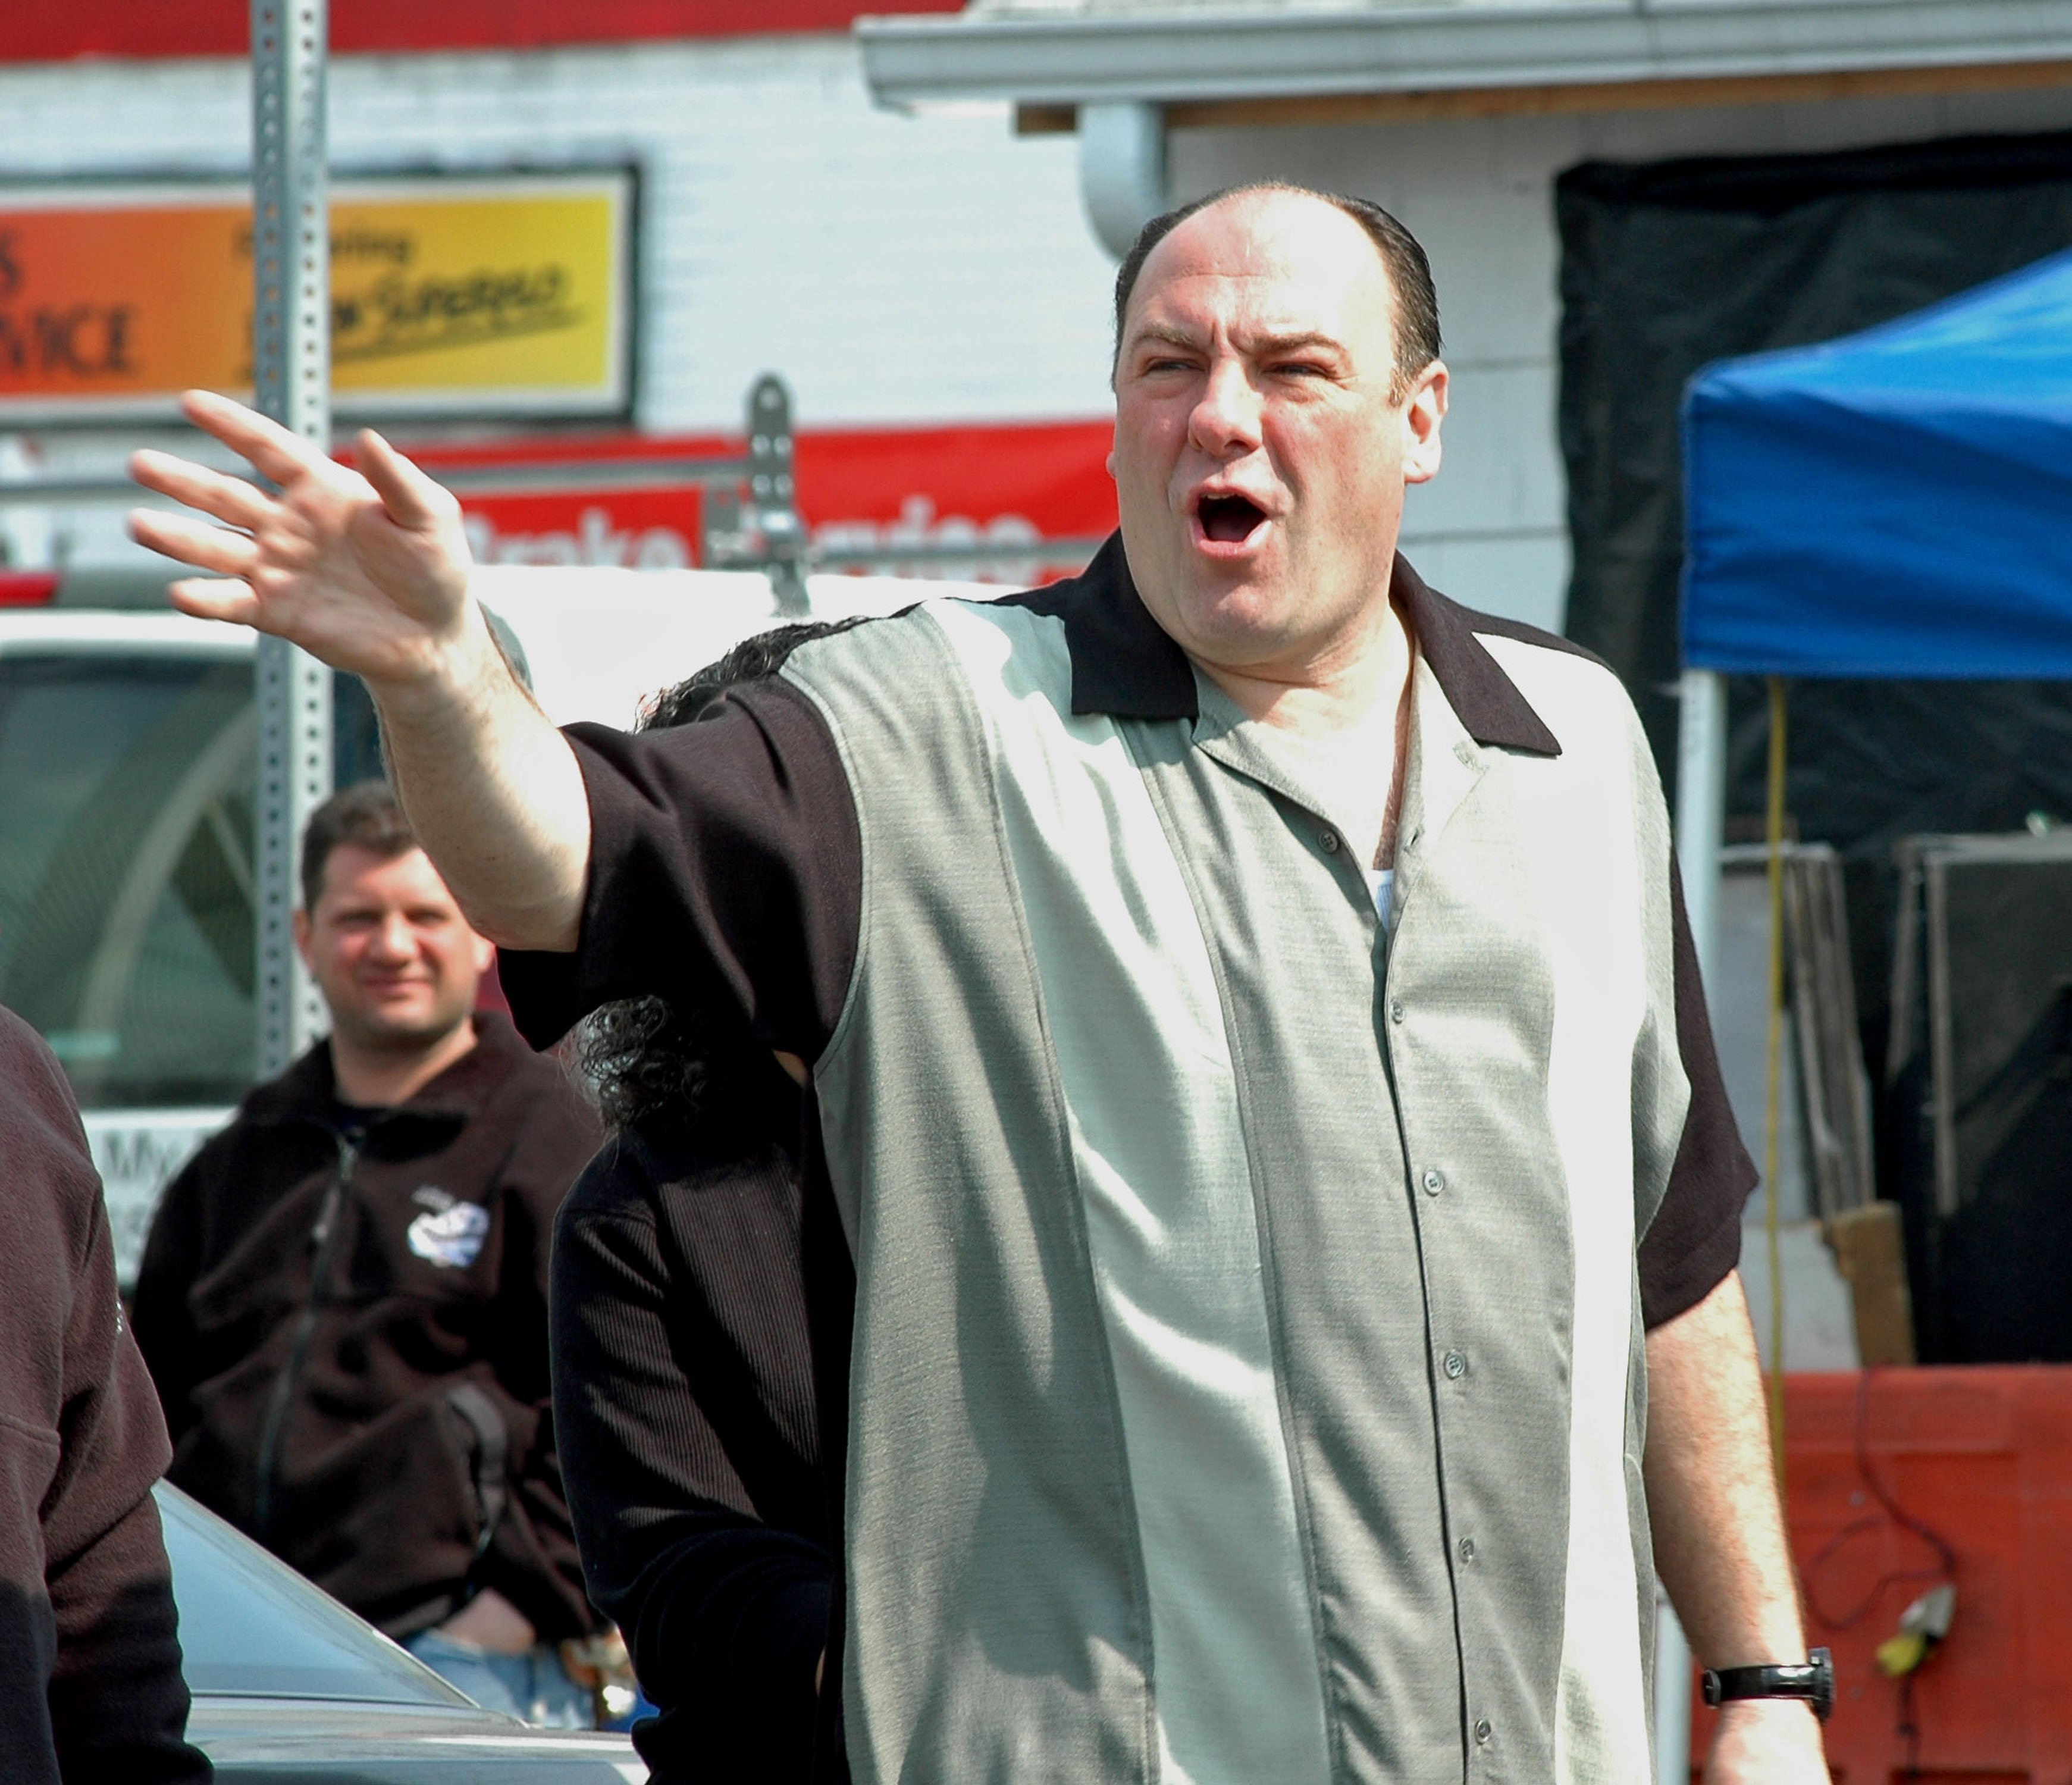 James Gandolfini as Tony Soprano in the HBO series, "The Sopranos" which debuted in 1999. | Photo: Getty Images. 